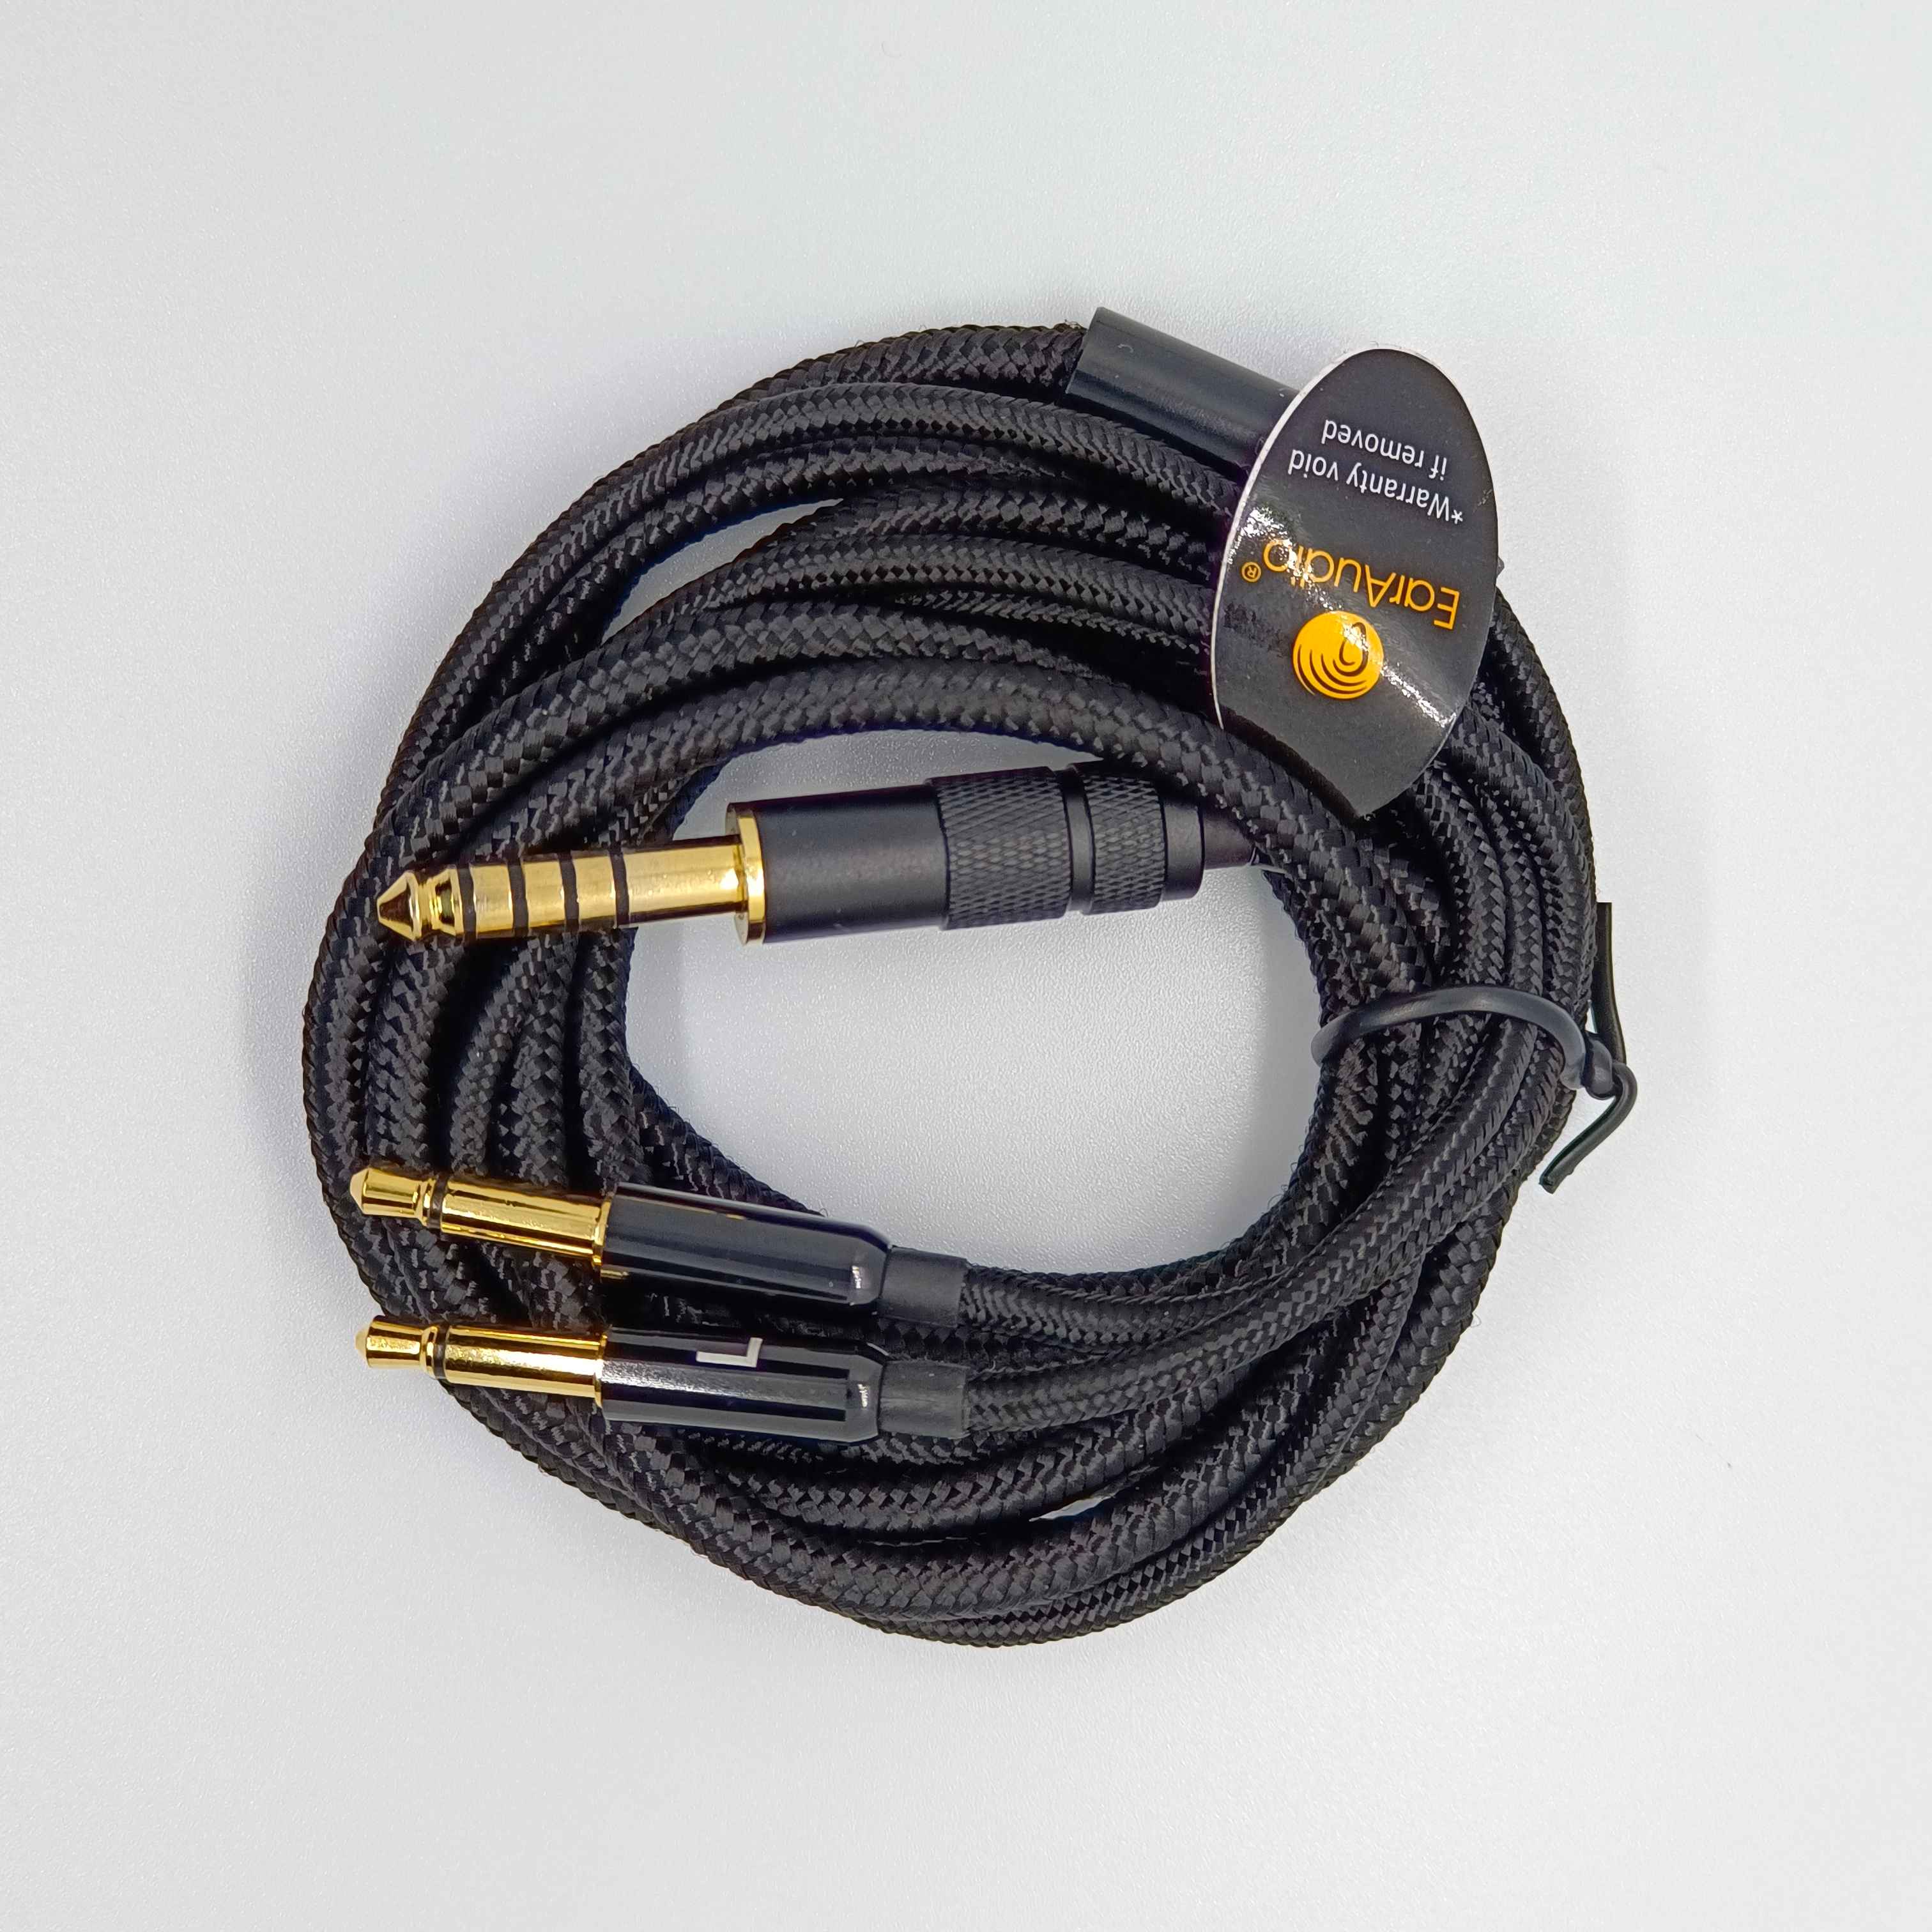 Buy Ear Audio 2.5mm & 4.4mm Balanced Cable for HiFiMAN HE400SE, HiFiMAN Sundara, HiFiMAN Ananda, HiFiMAN Arya & Focal Clear Cable at HiFiNage in India with warranty.